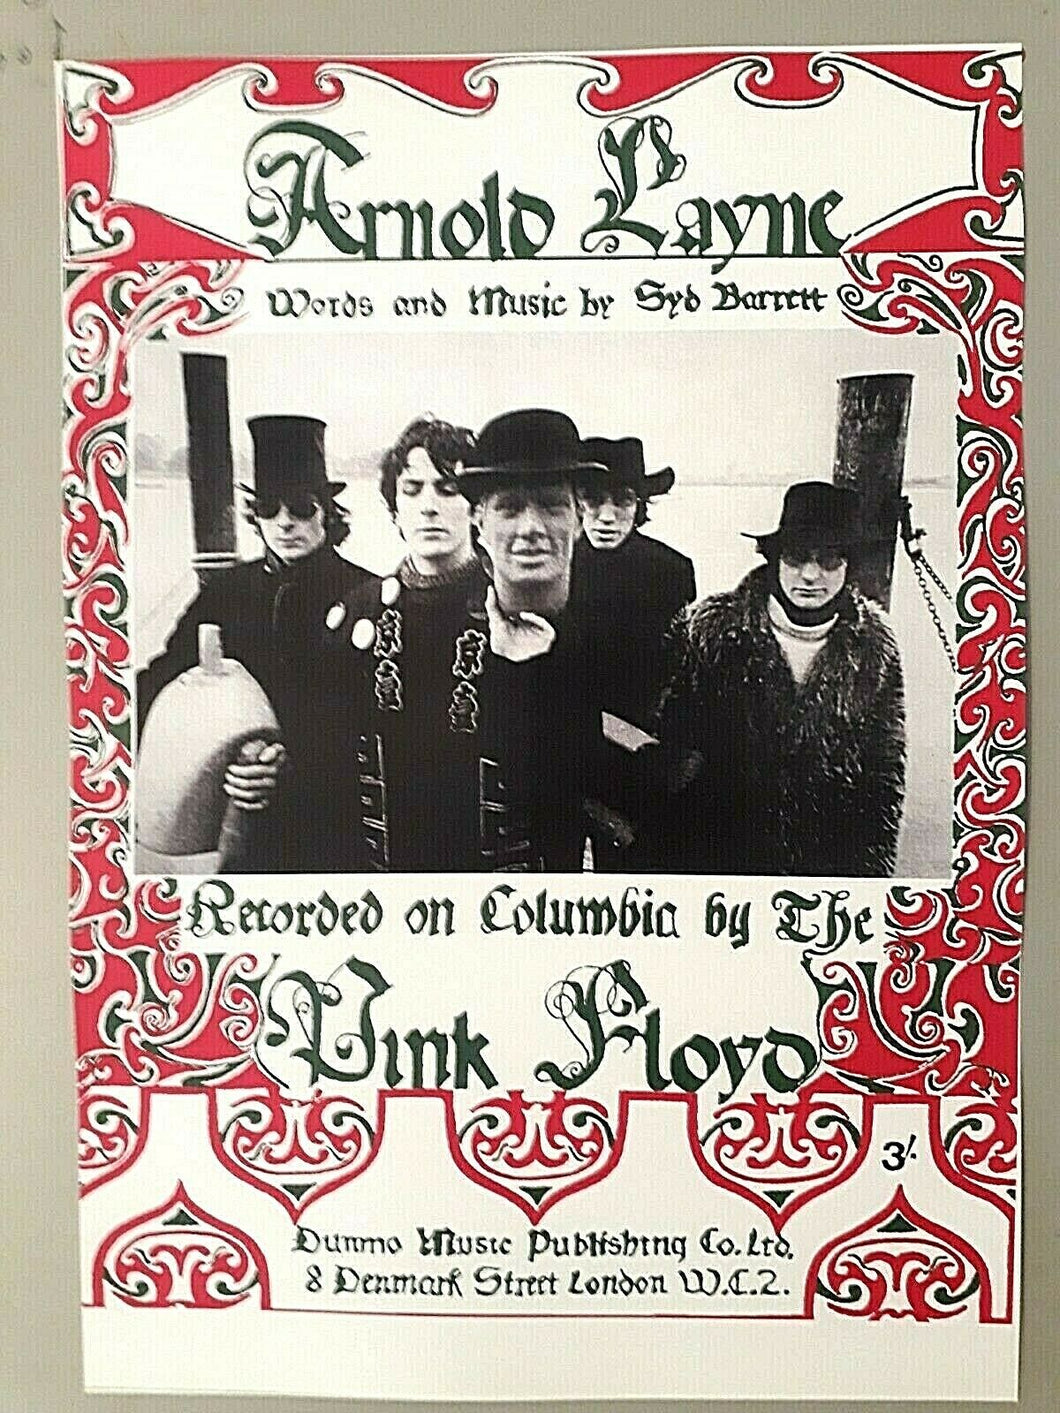 Pink Floyd poster - Arnold Layne sheet music 1967 promotional advert A3 reprint - Original Music and Movie Posters for sale from Bamalama - Online Poster Store UK London